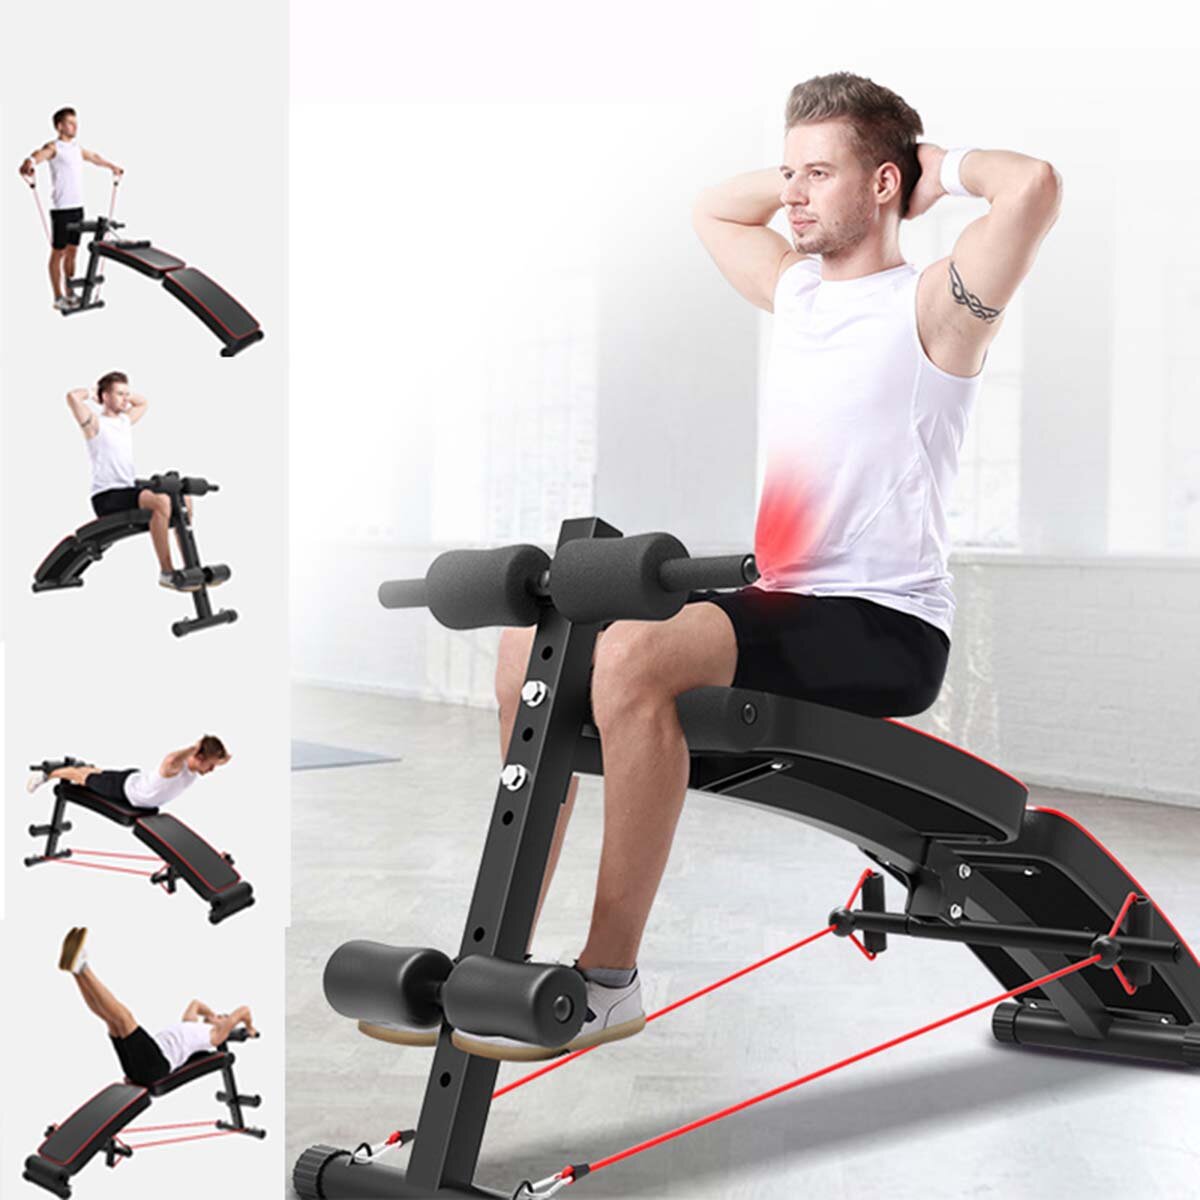 5 in 1 Multi-Functional Bench Folding Supine Abdominal Muscle Board For Full All-in-One Body Workout